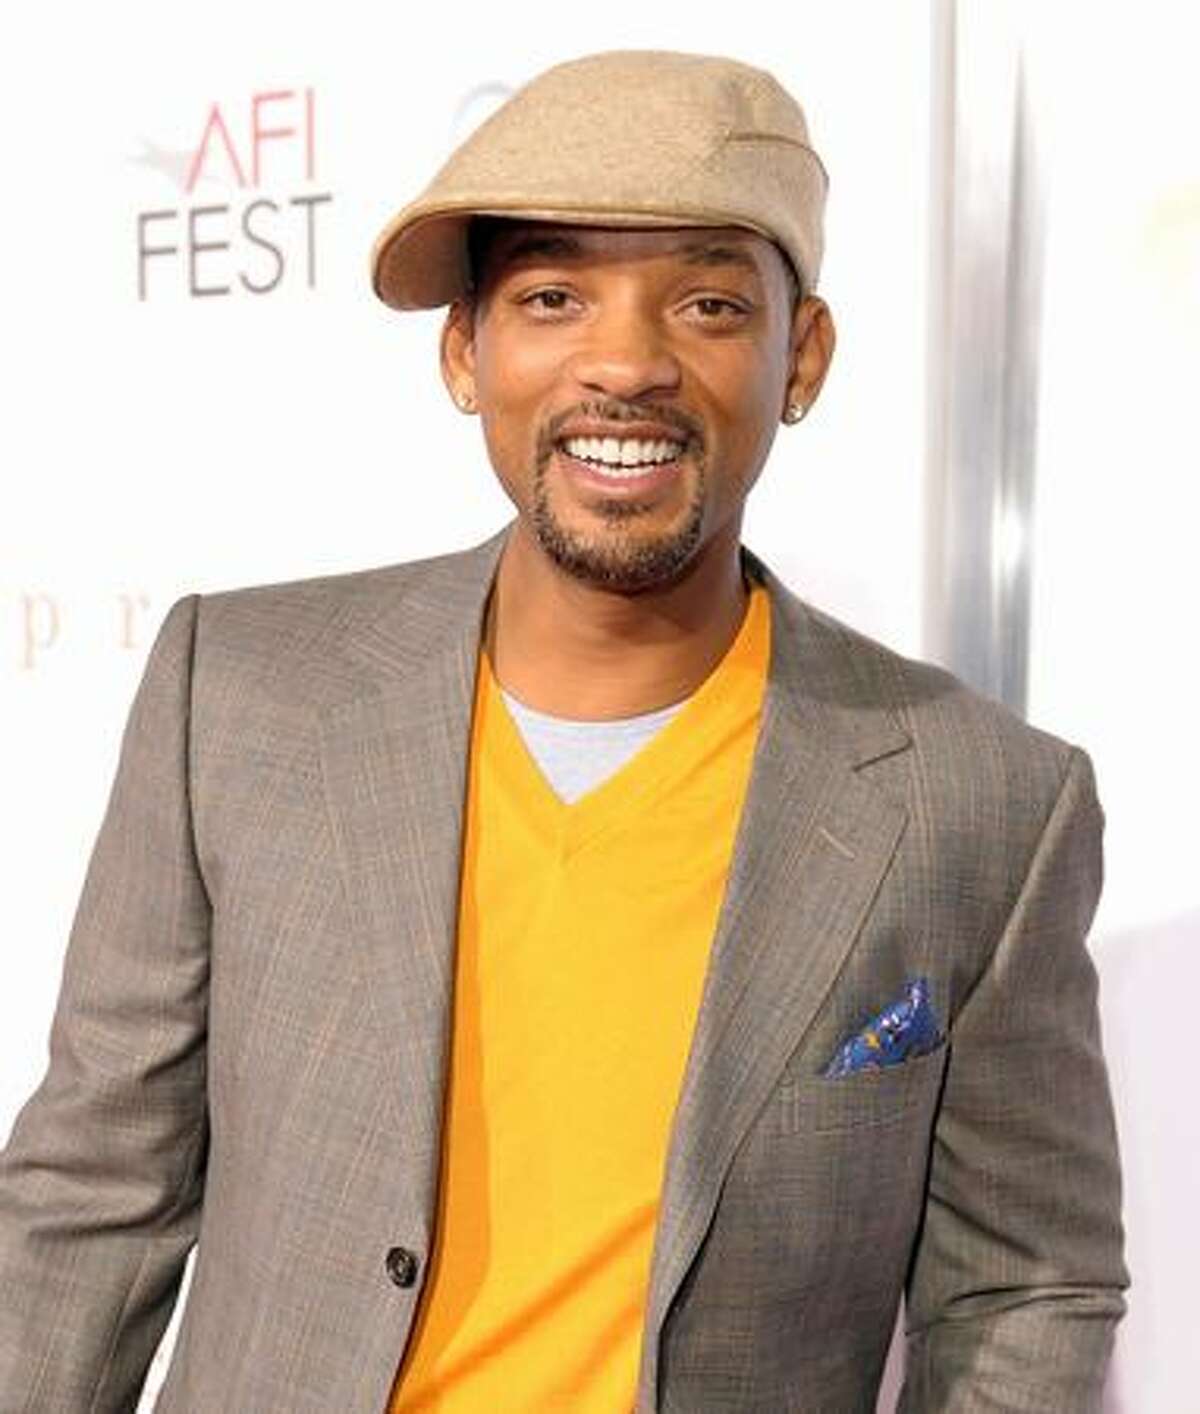 Actor Will Smith arrives at the screening of "Precious: Based On The Novel 'PUSH' By Sapphire" during AFI FEST 2009 held at Grauman's Chinese Theatre in Hollywood, California.